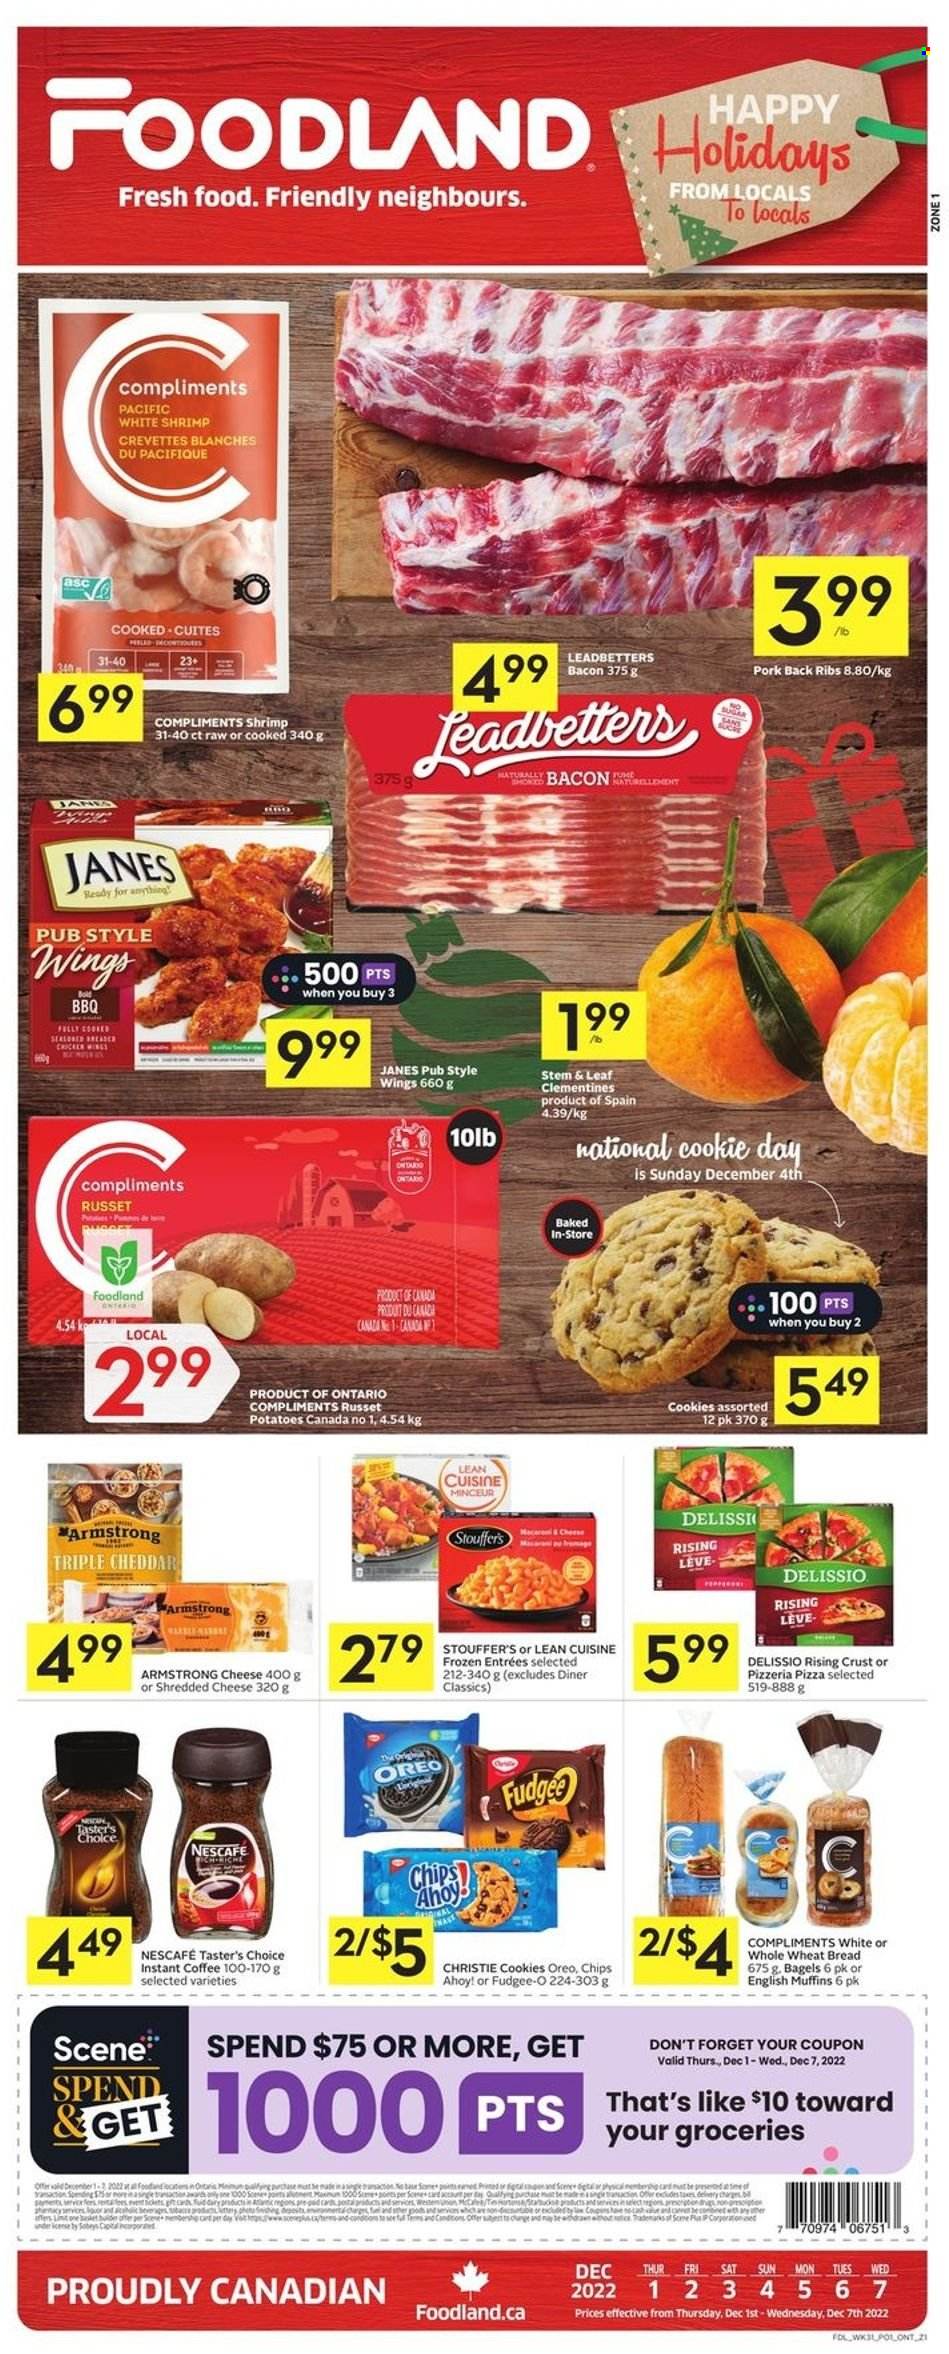 thumbnail - Foodland Flyer - December 01, 2022 - December 07, 2022 - Sales products - bagels, english muffins, wheat bread, russet potatoes, potatoes, clementines, shrimps, macaroni & cheese, pizza, Lean Cuisine, bacon, shredded cheese, Stouffer's, cookies, fudge, Chips Ahoy!, coffee, instant coffee, Starbucks, pork meat, pork ribs, pork back ribs, basket, Oreo, Nescafé. Page 1.